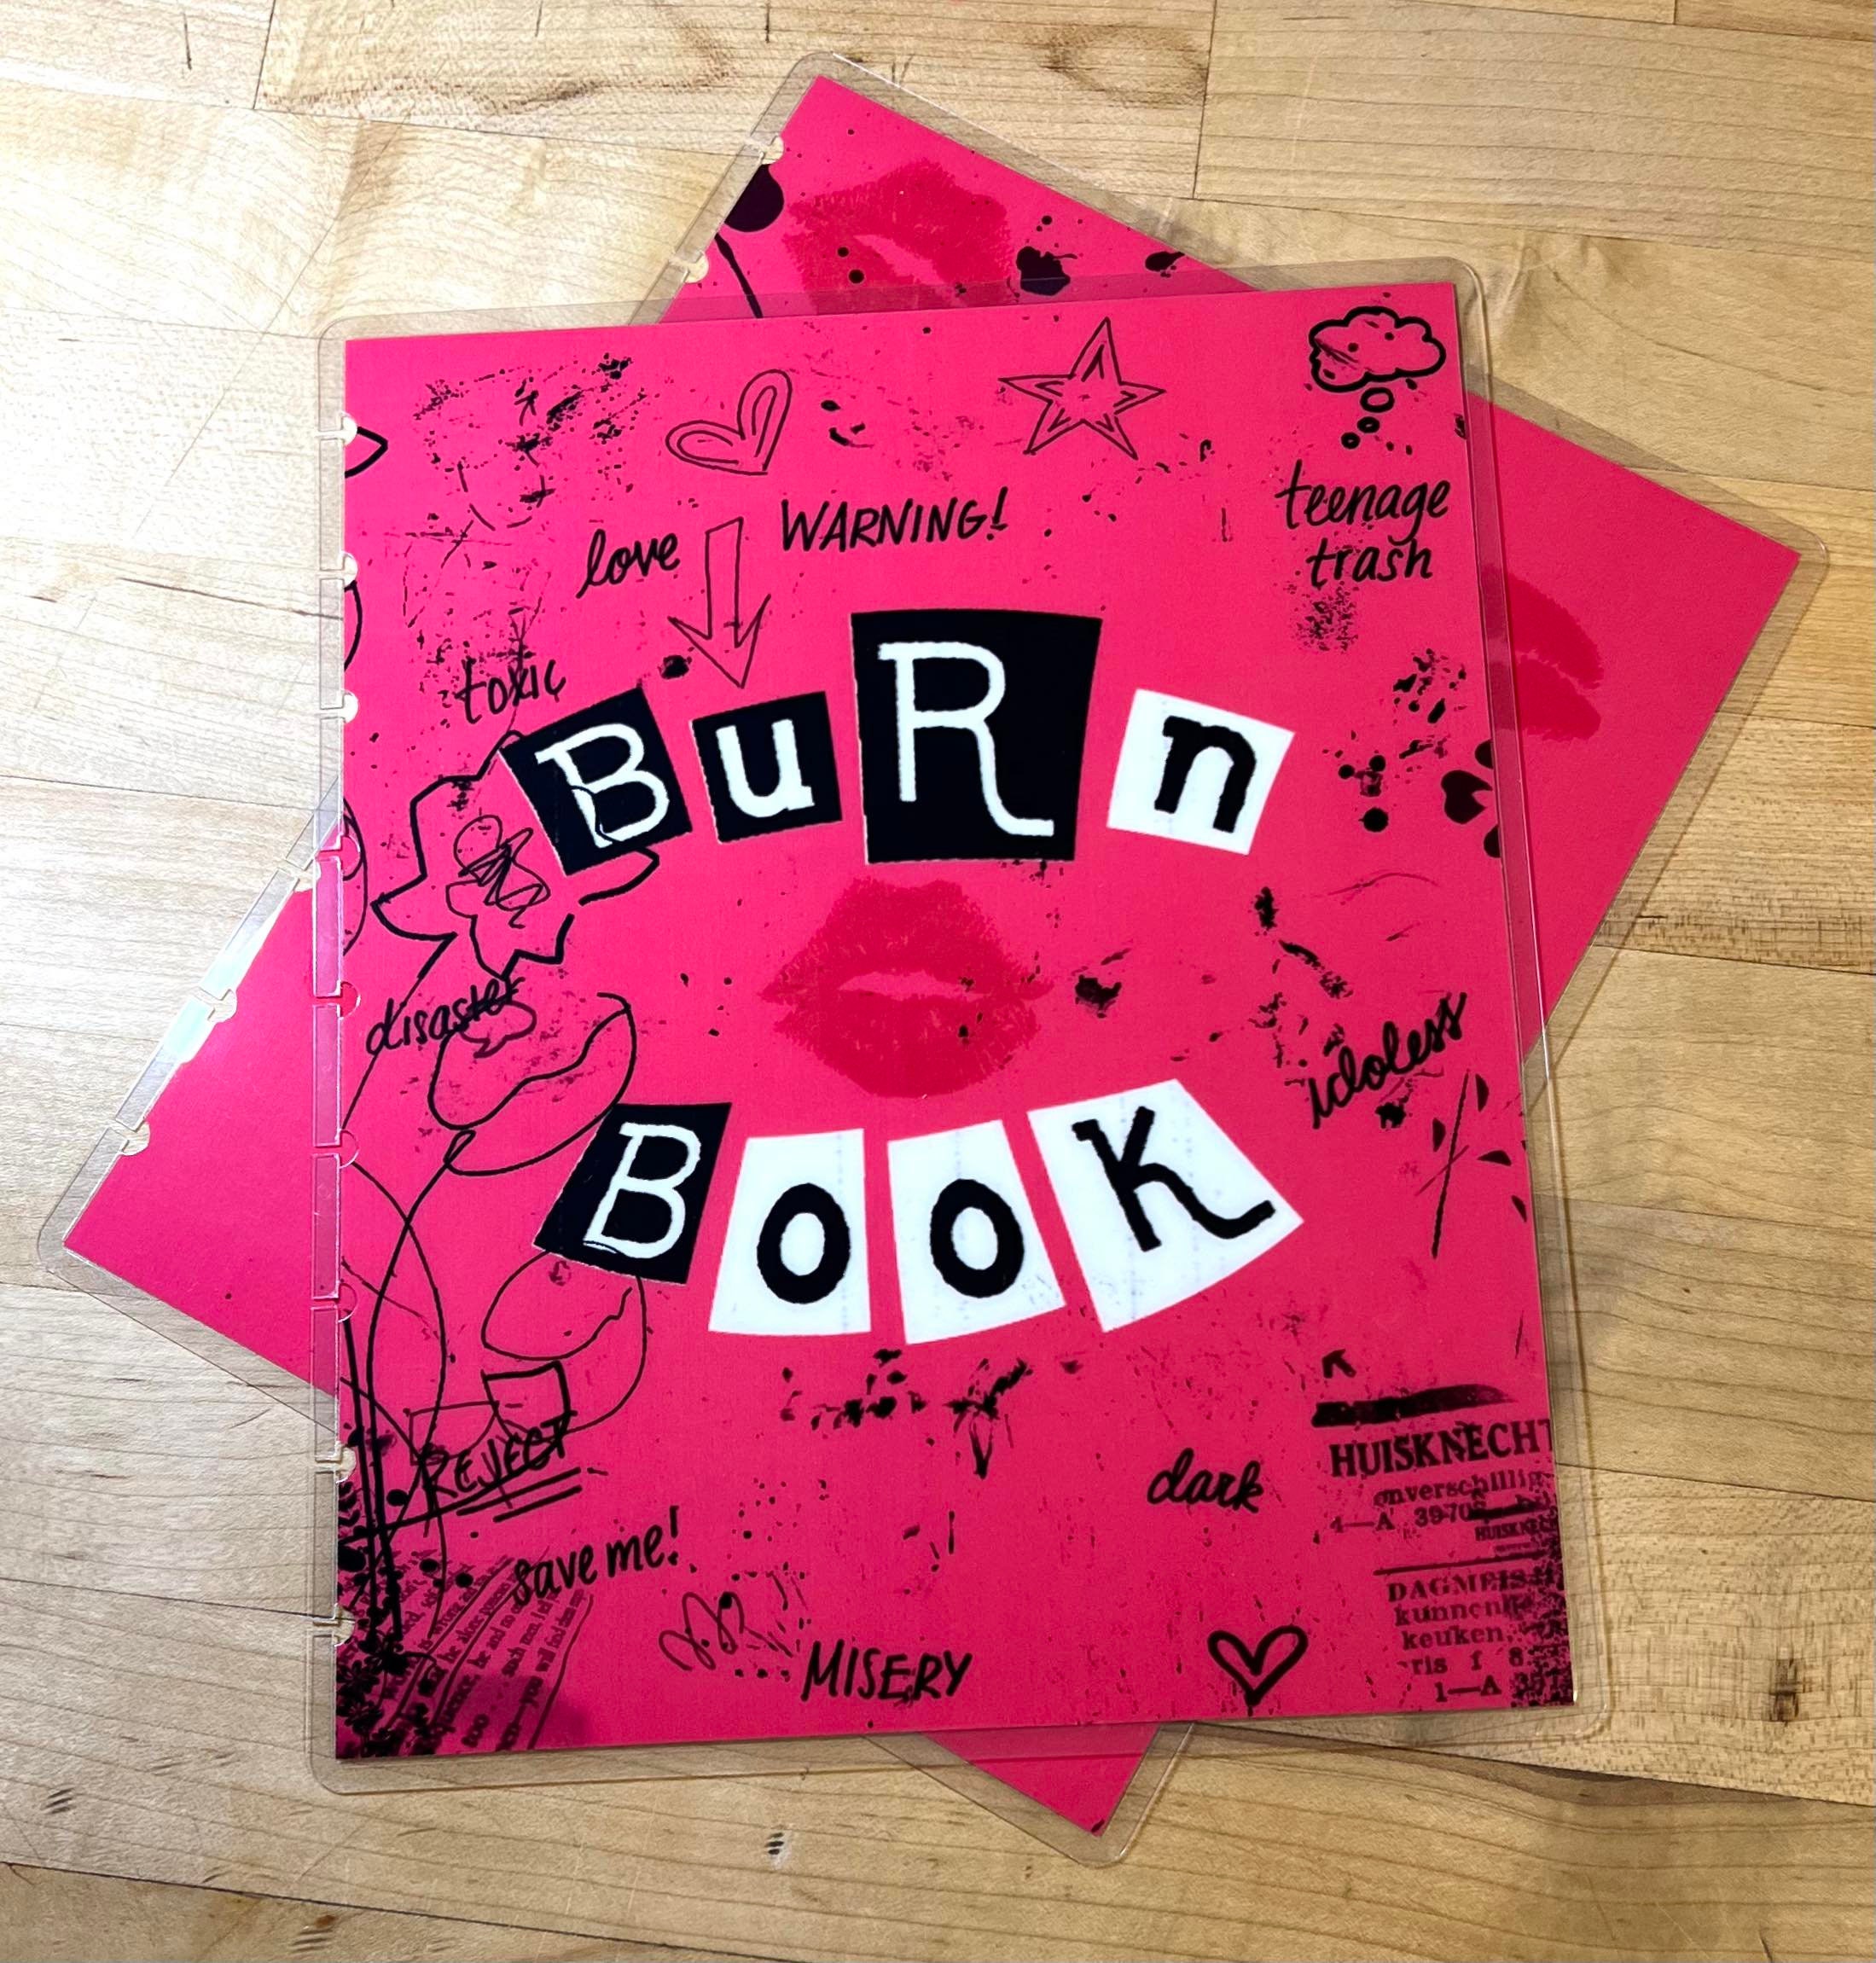 How to Create the Burn Book from Mean Girls in 5 Easy Steps